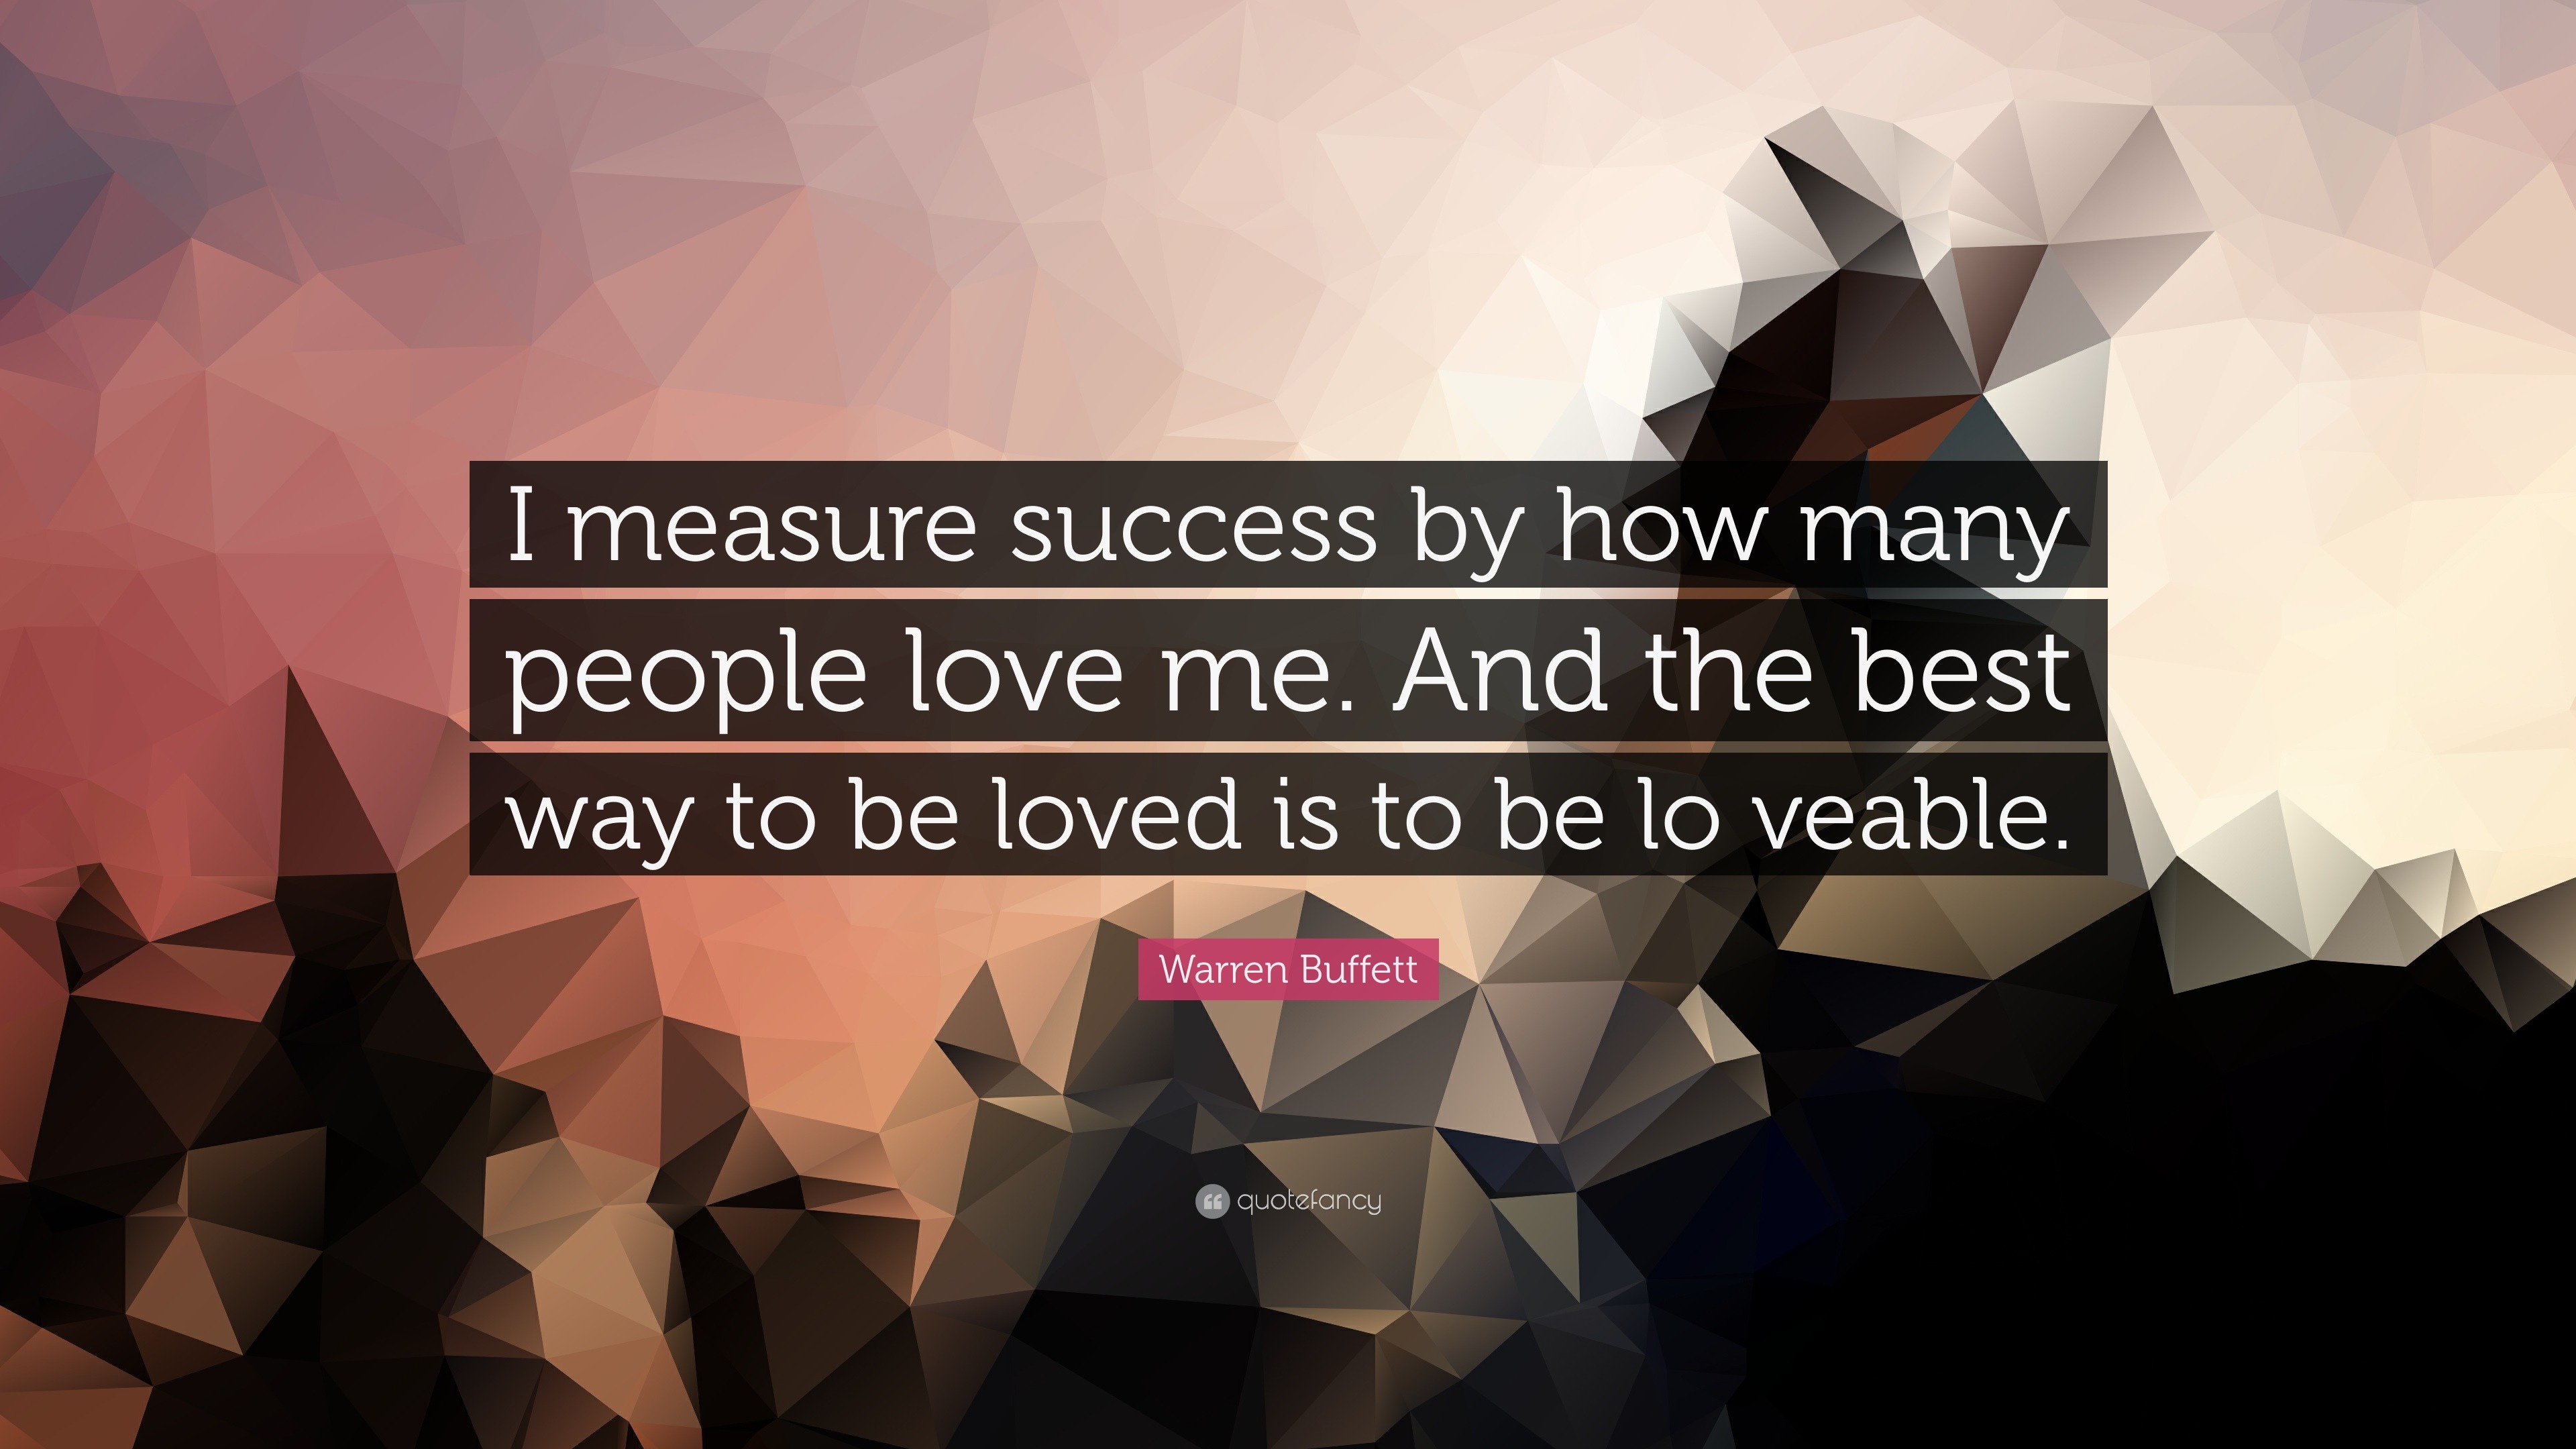 Warren Buffett Quote I Measure Success By How Many People Love Me And The Best Way